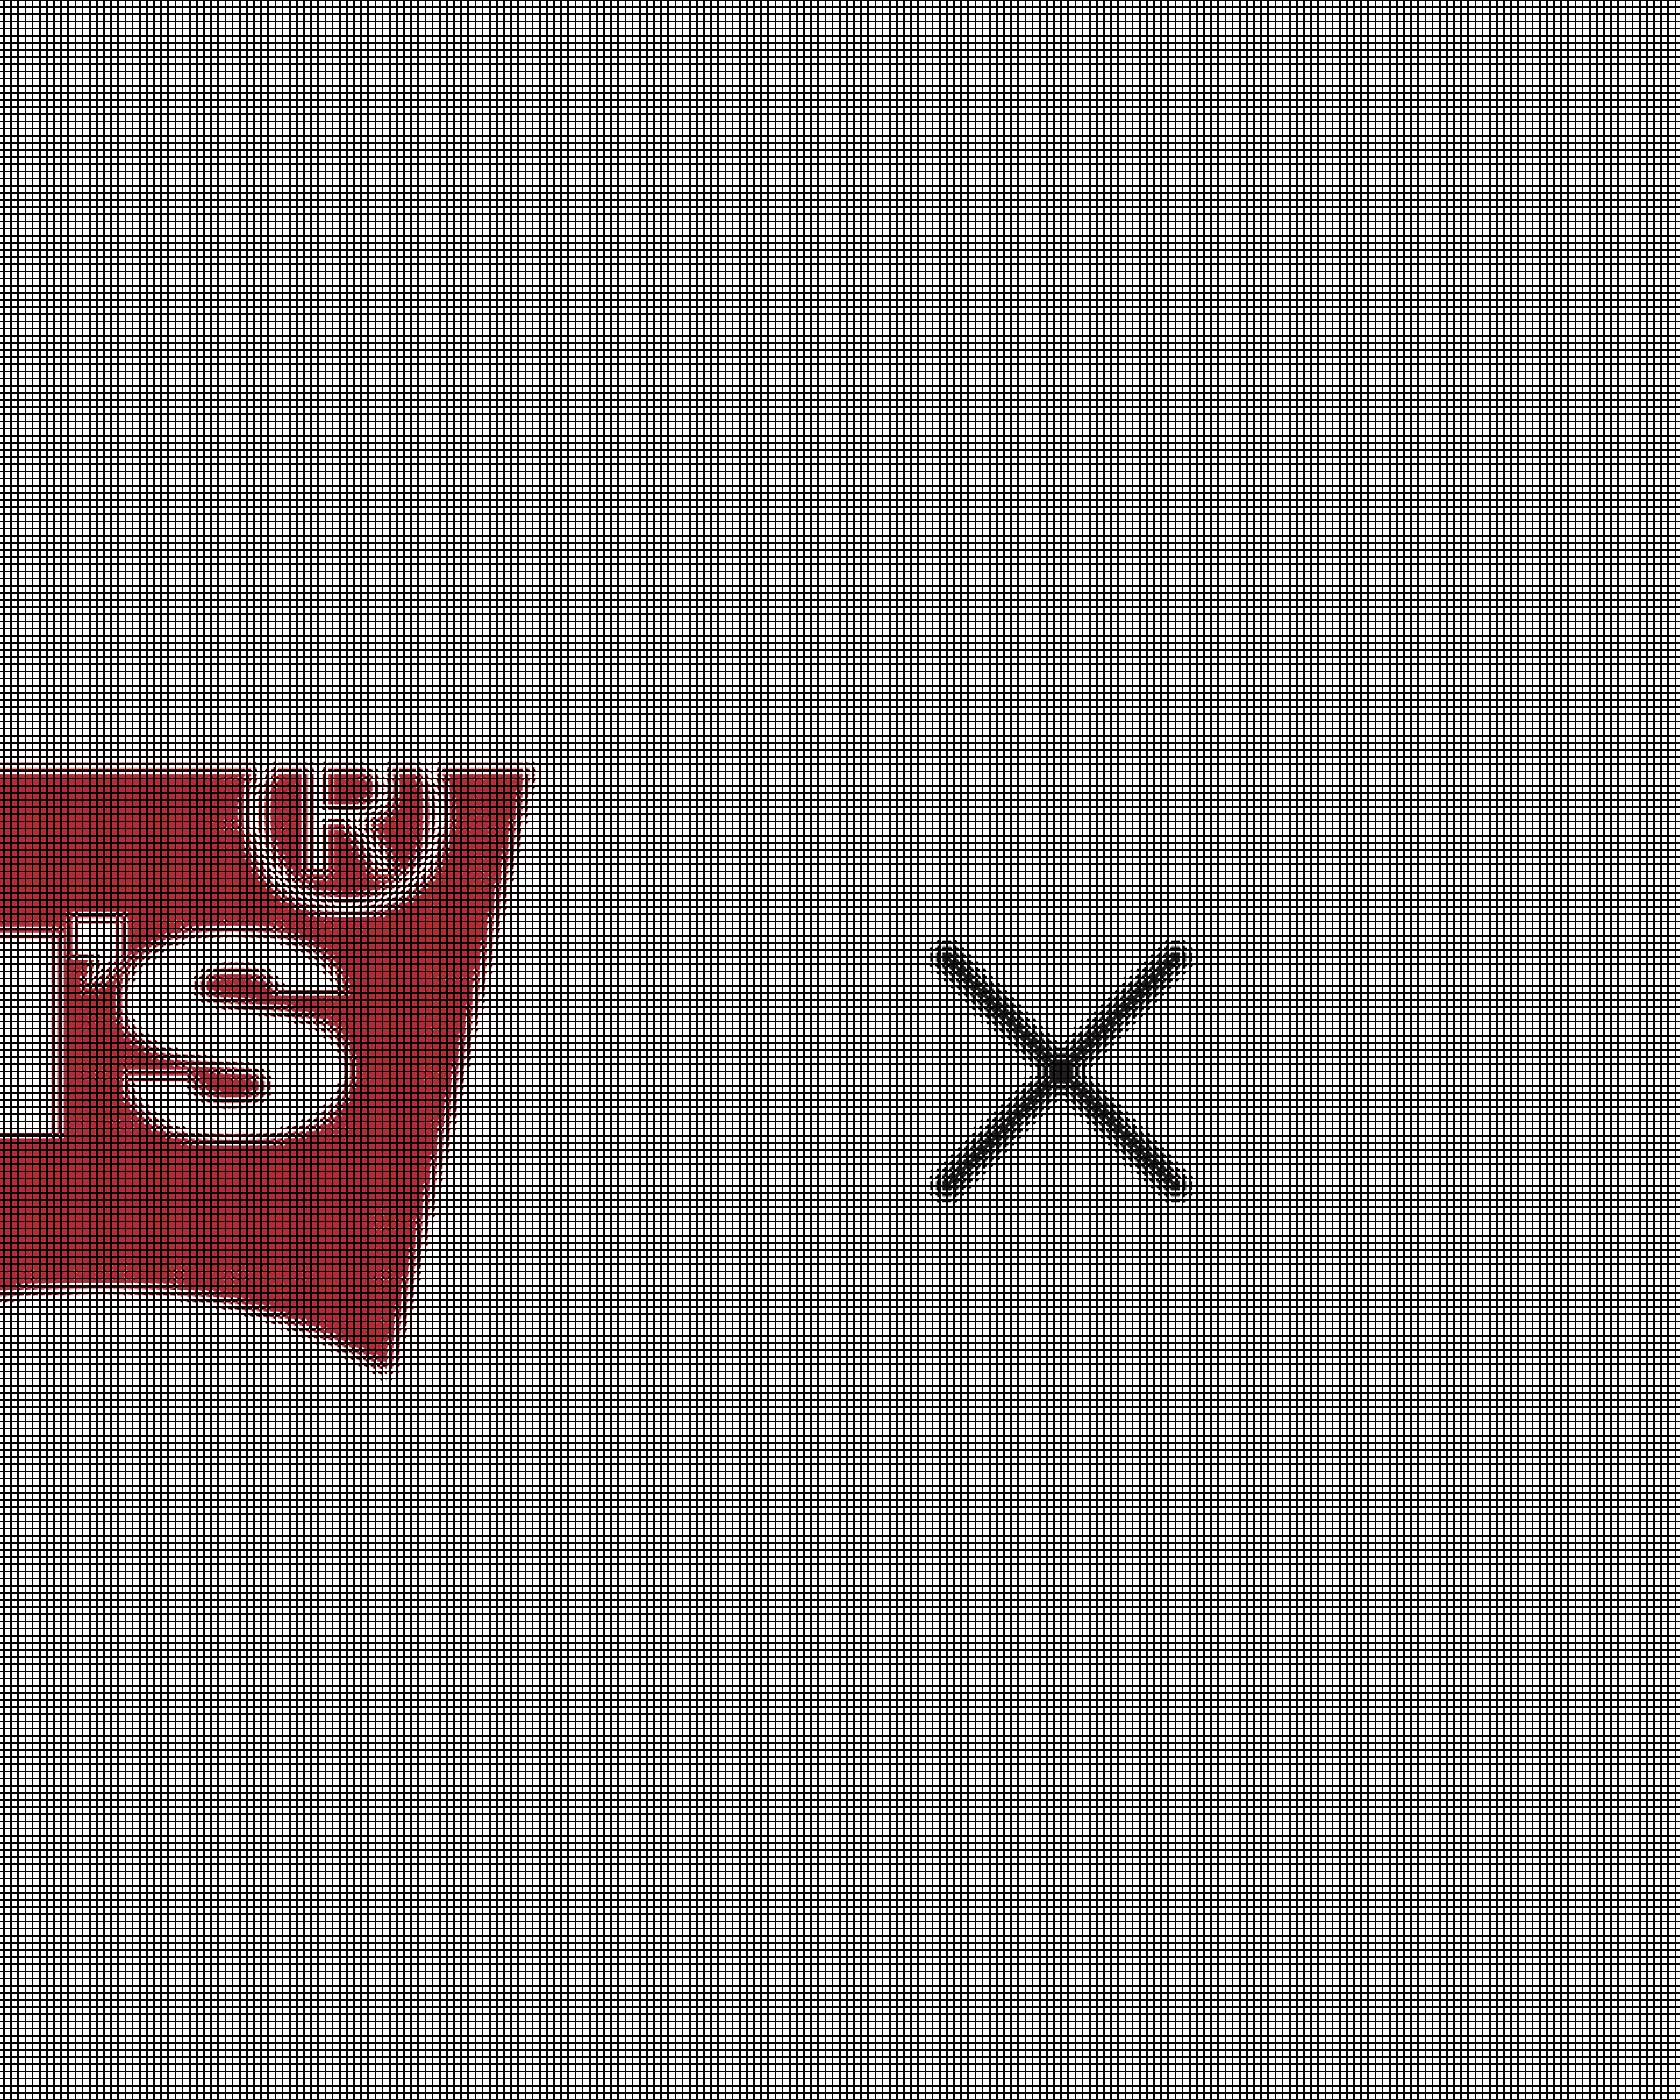 A graphic of the Levi's logo and the Bape logo